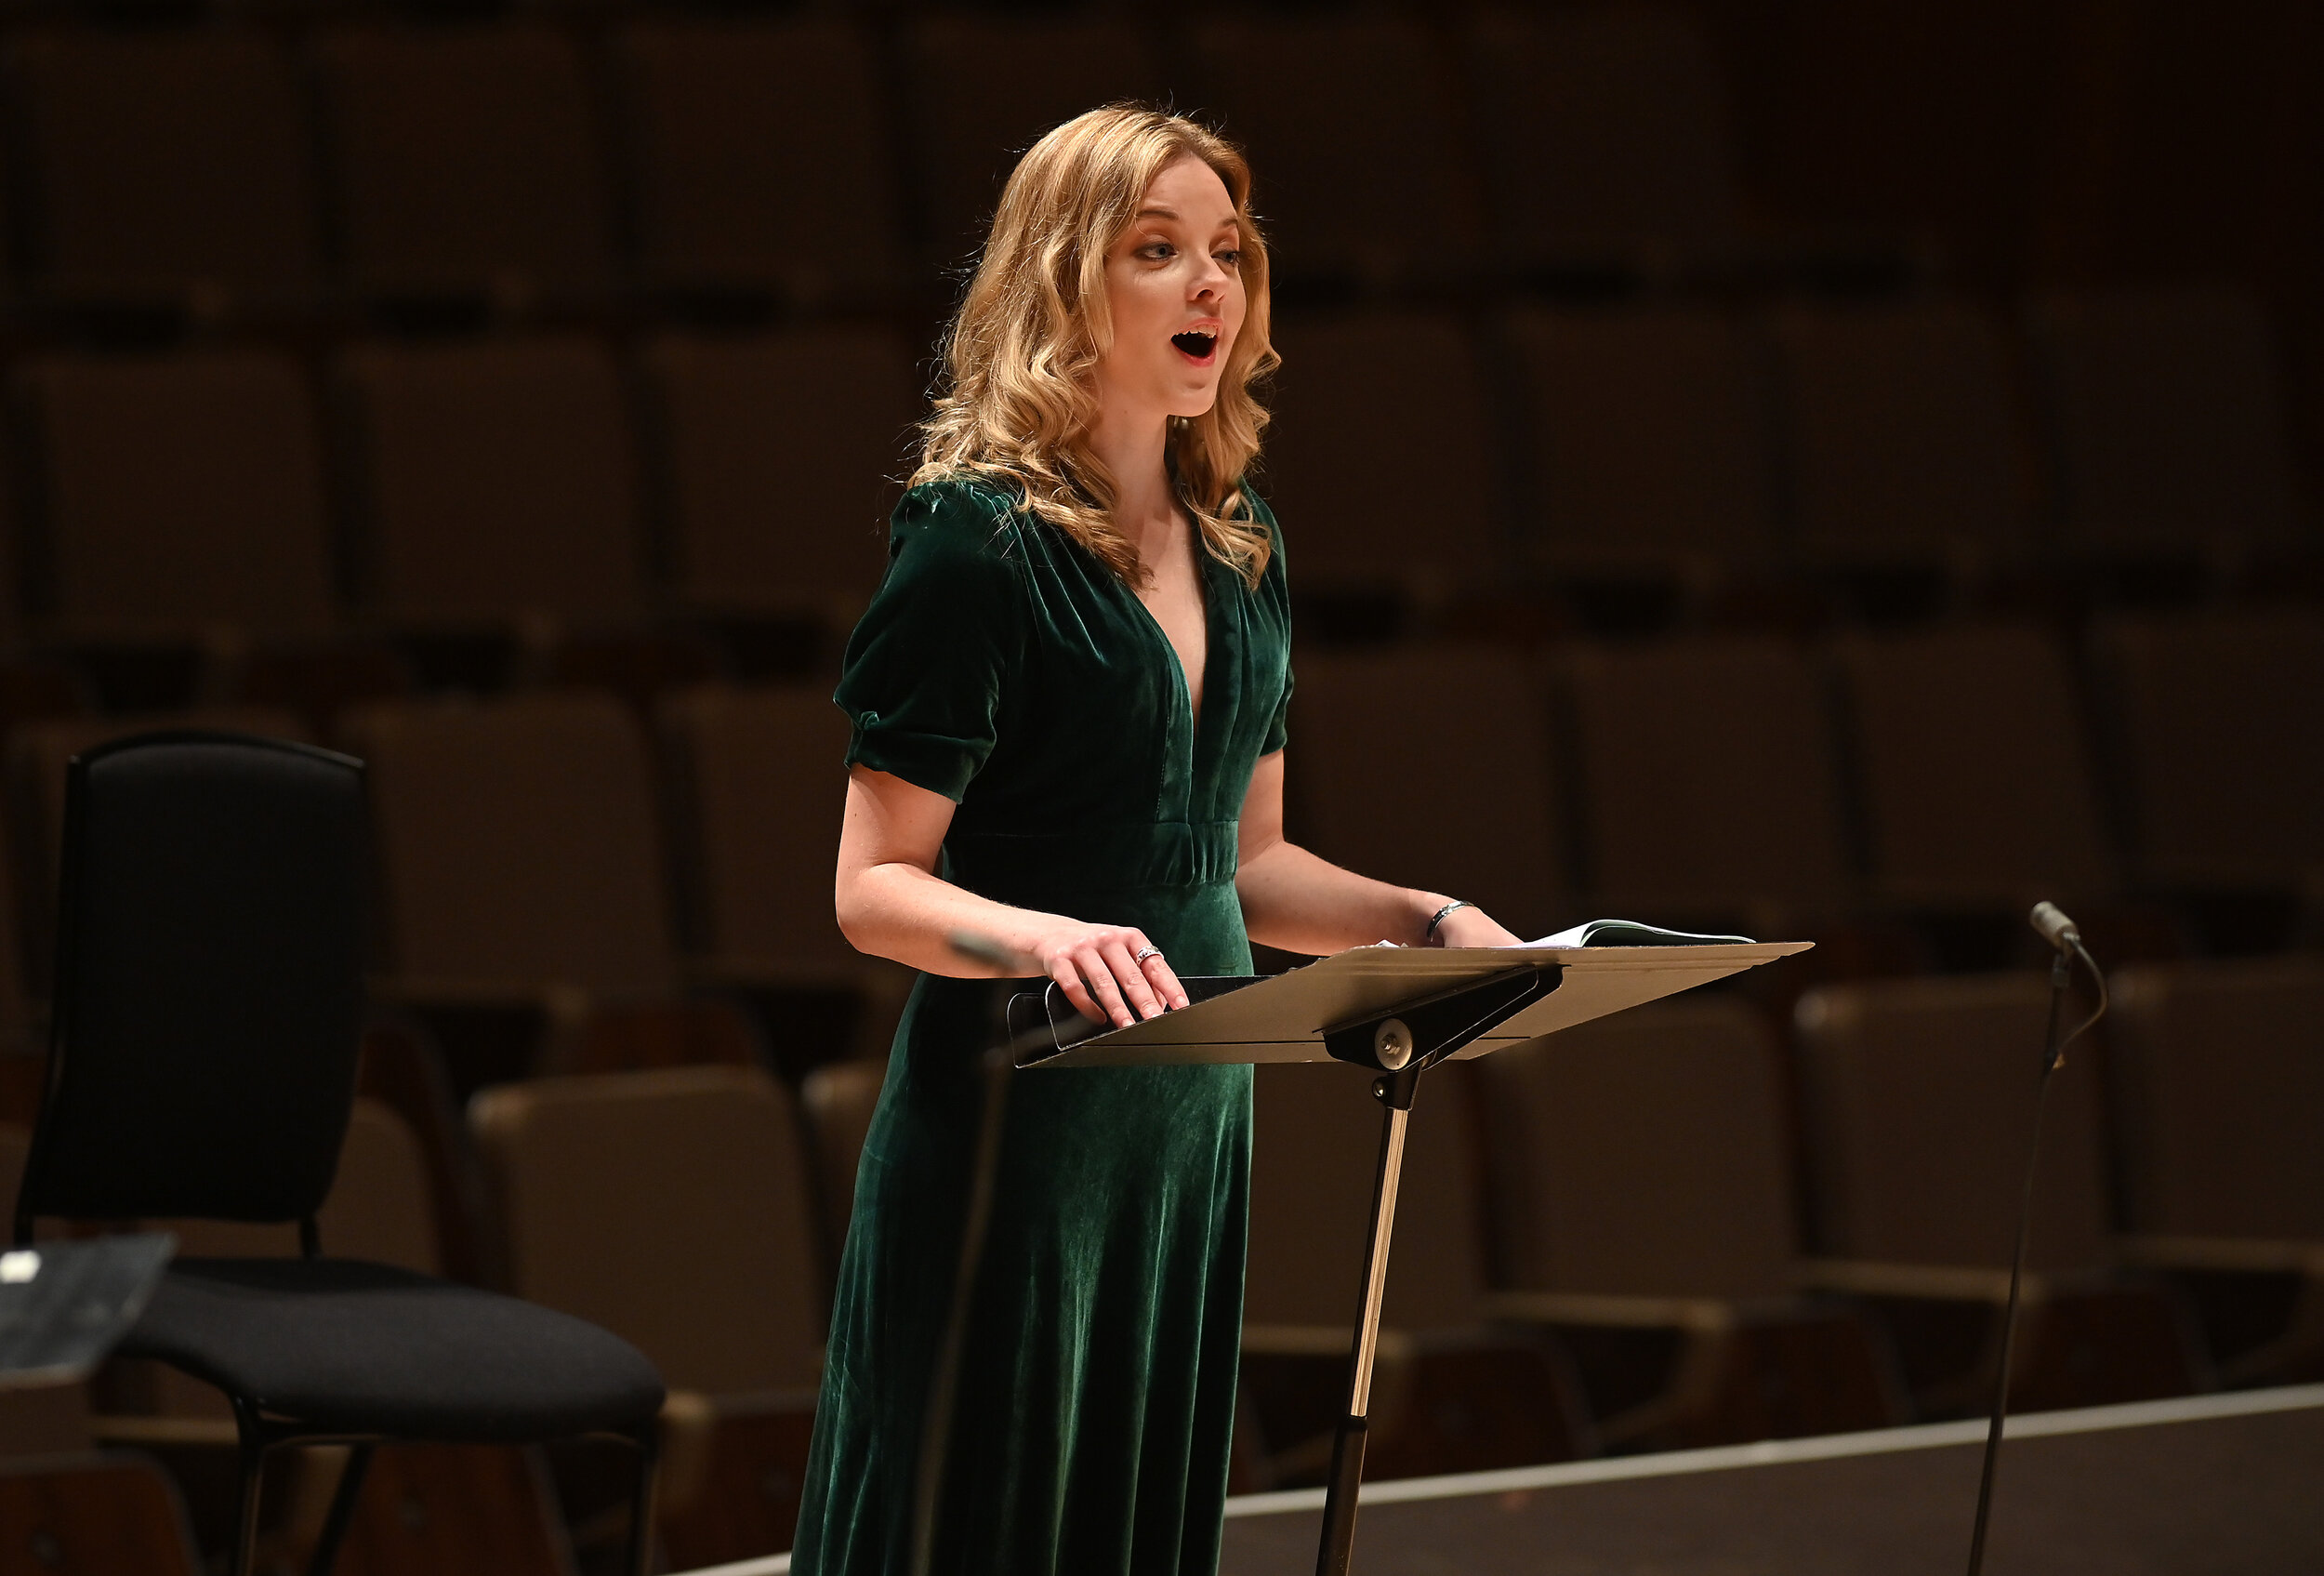 Soprano Rowan Pierce performs together with the Orchestra of the Age of Enlightenment at a concert on October 20 at the Southbank Centre London